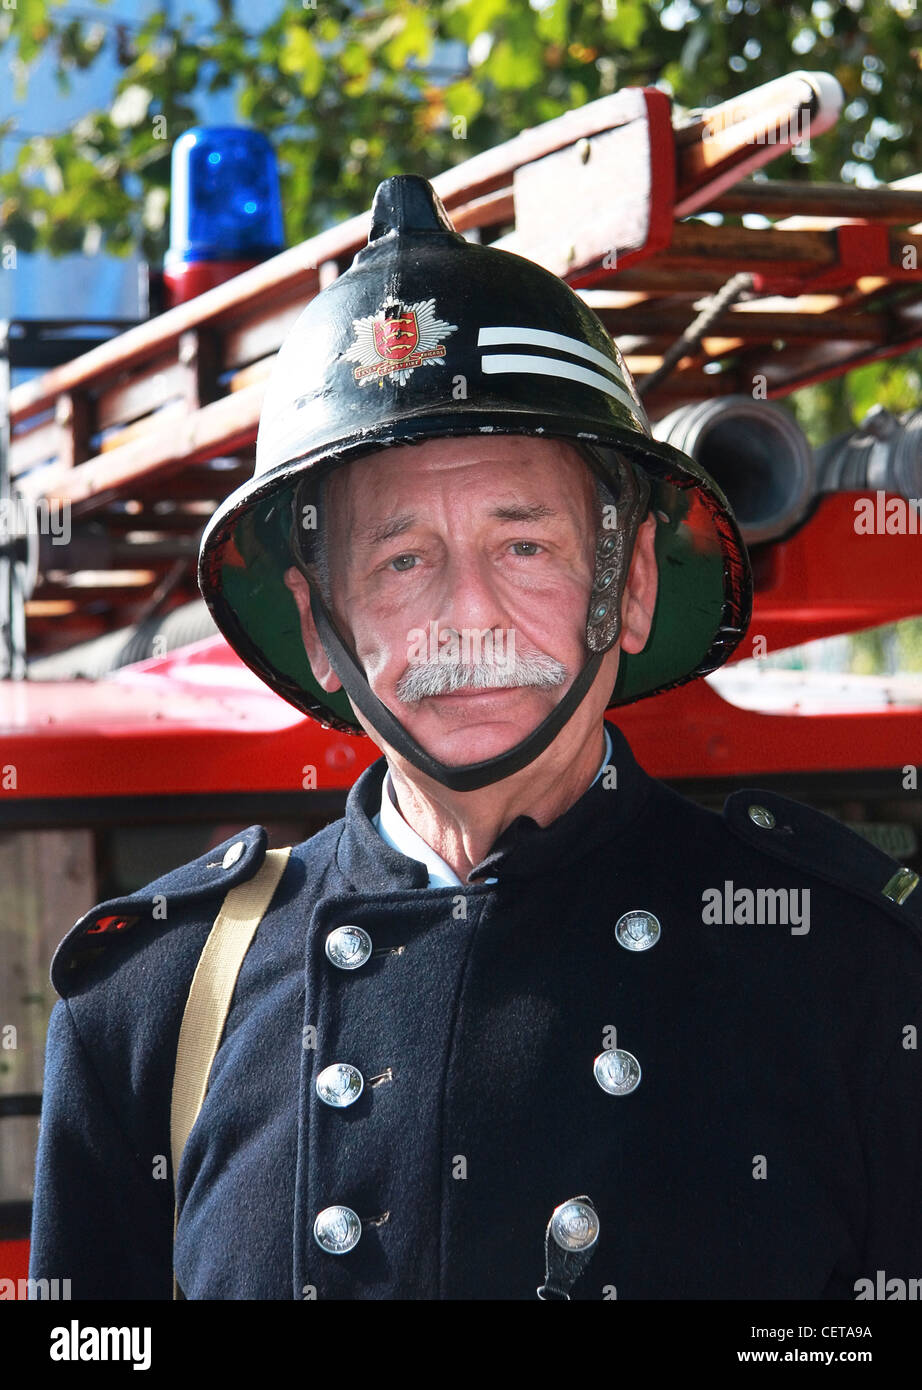 FIreman in retro outfit with ladder truck at Goodwood Revival. Stock Photo